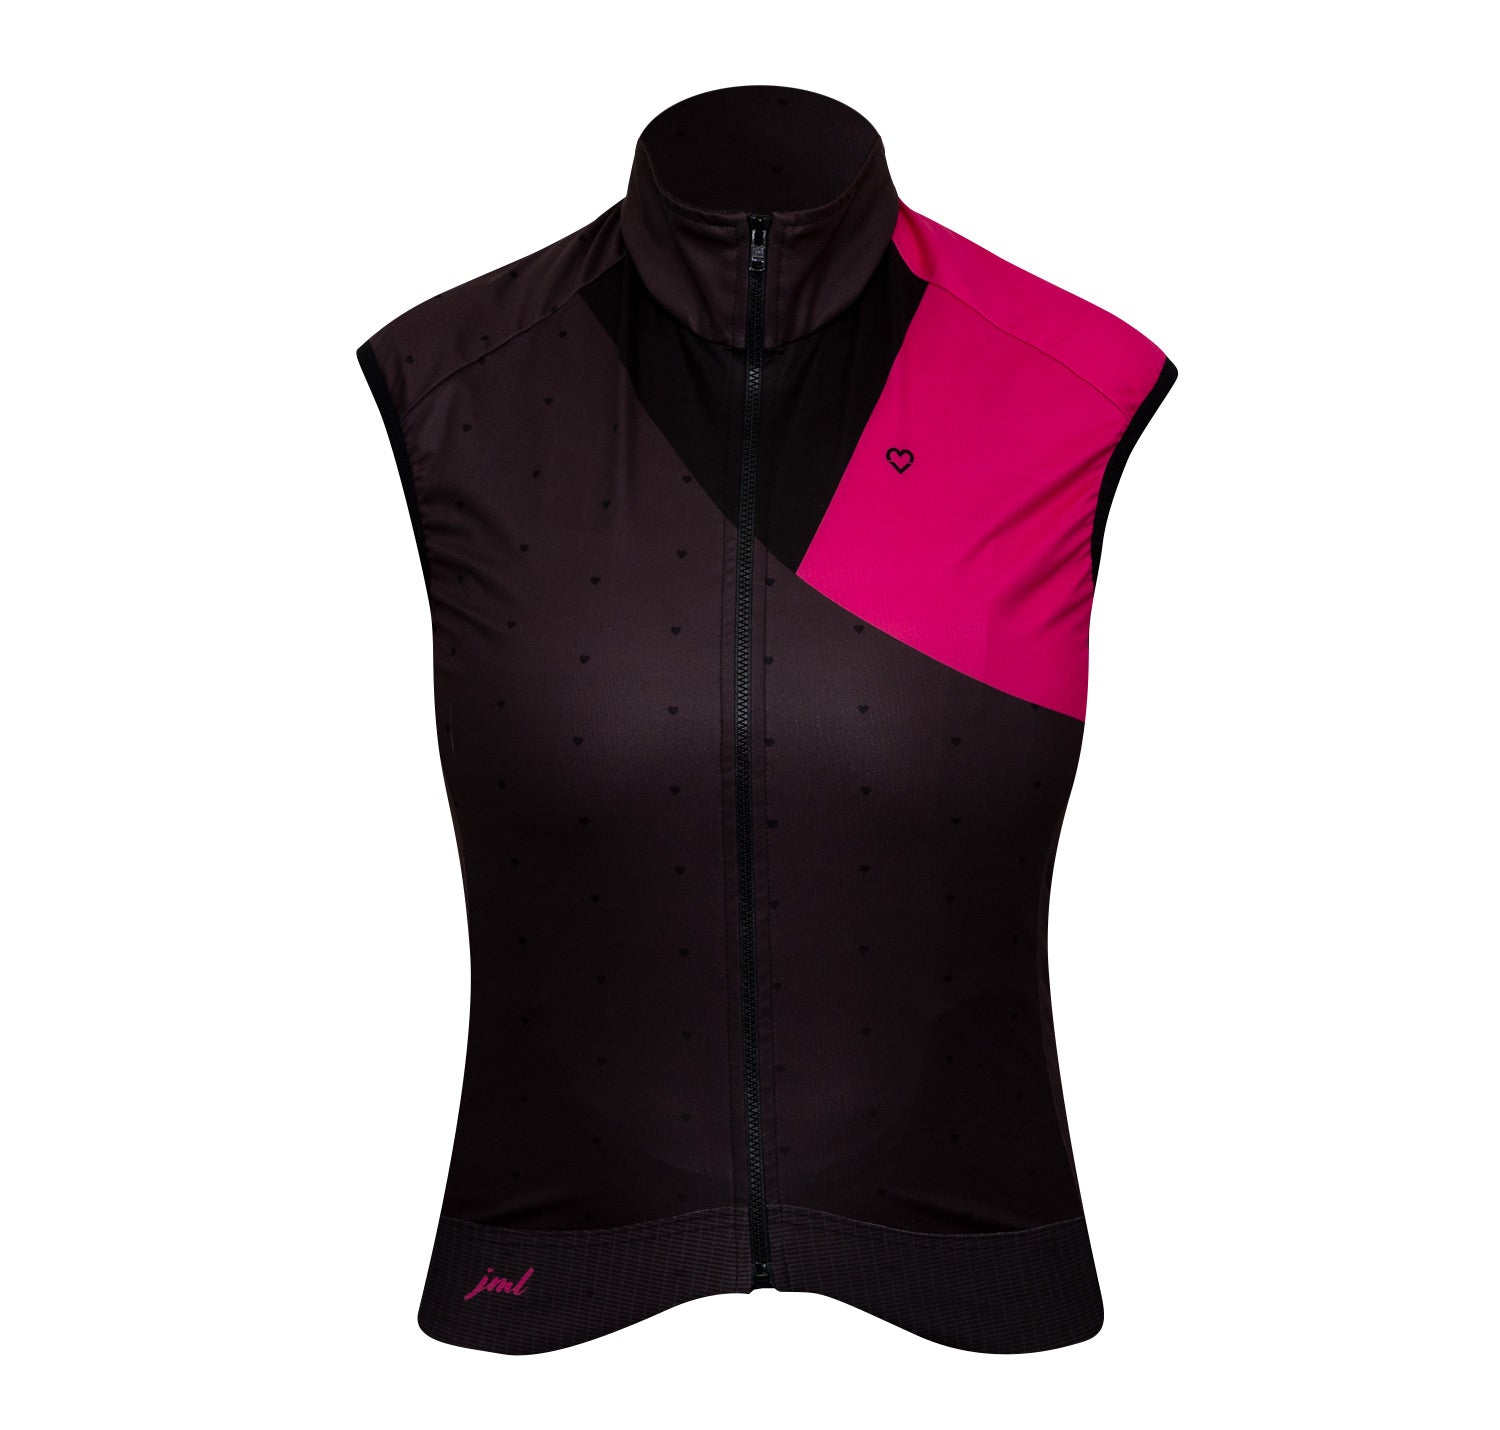 JML Triangle Vest W freeshipping - Jerseys Made with Love